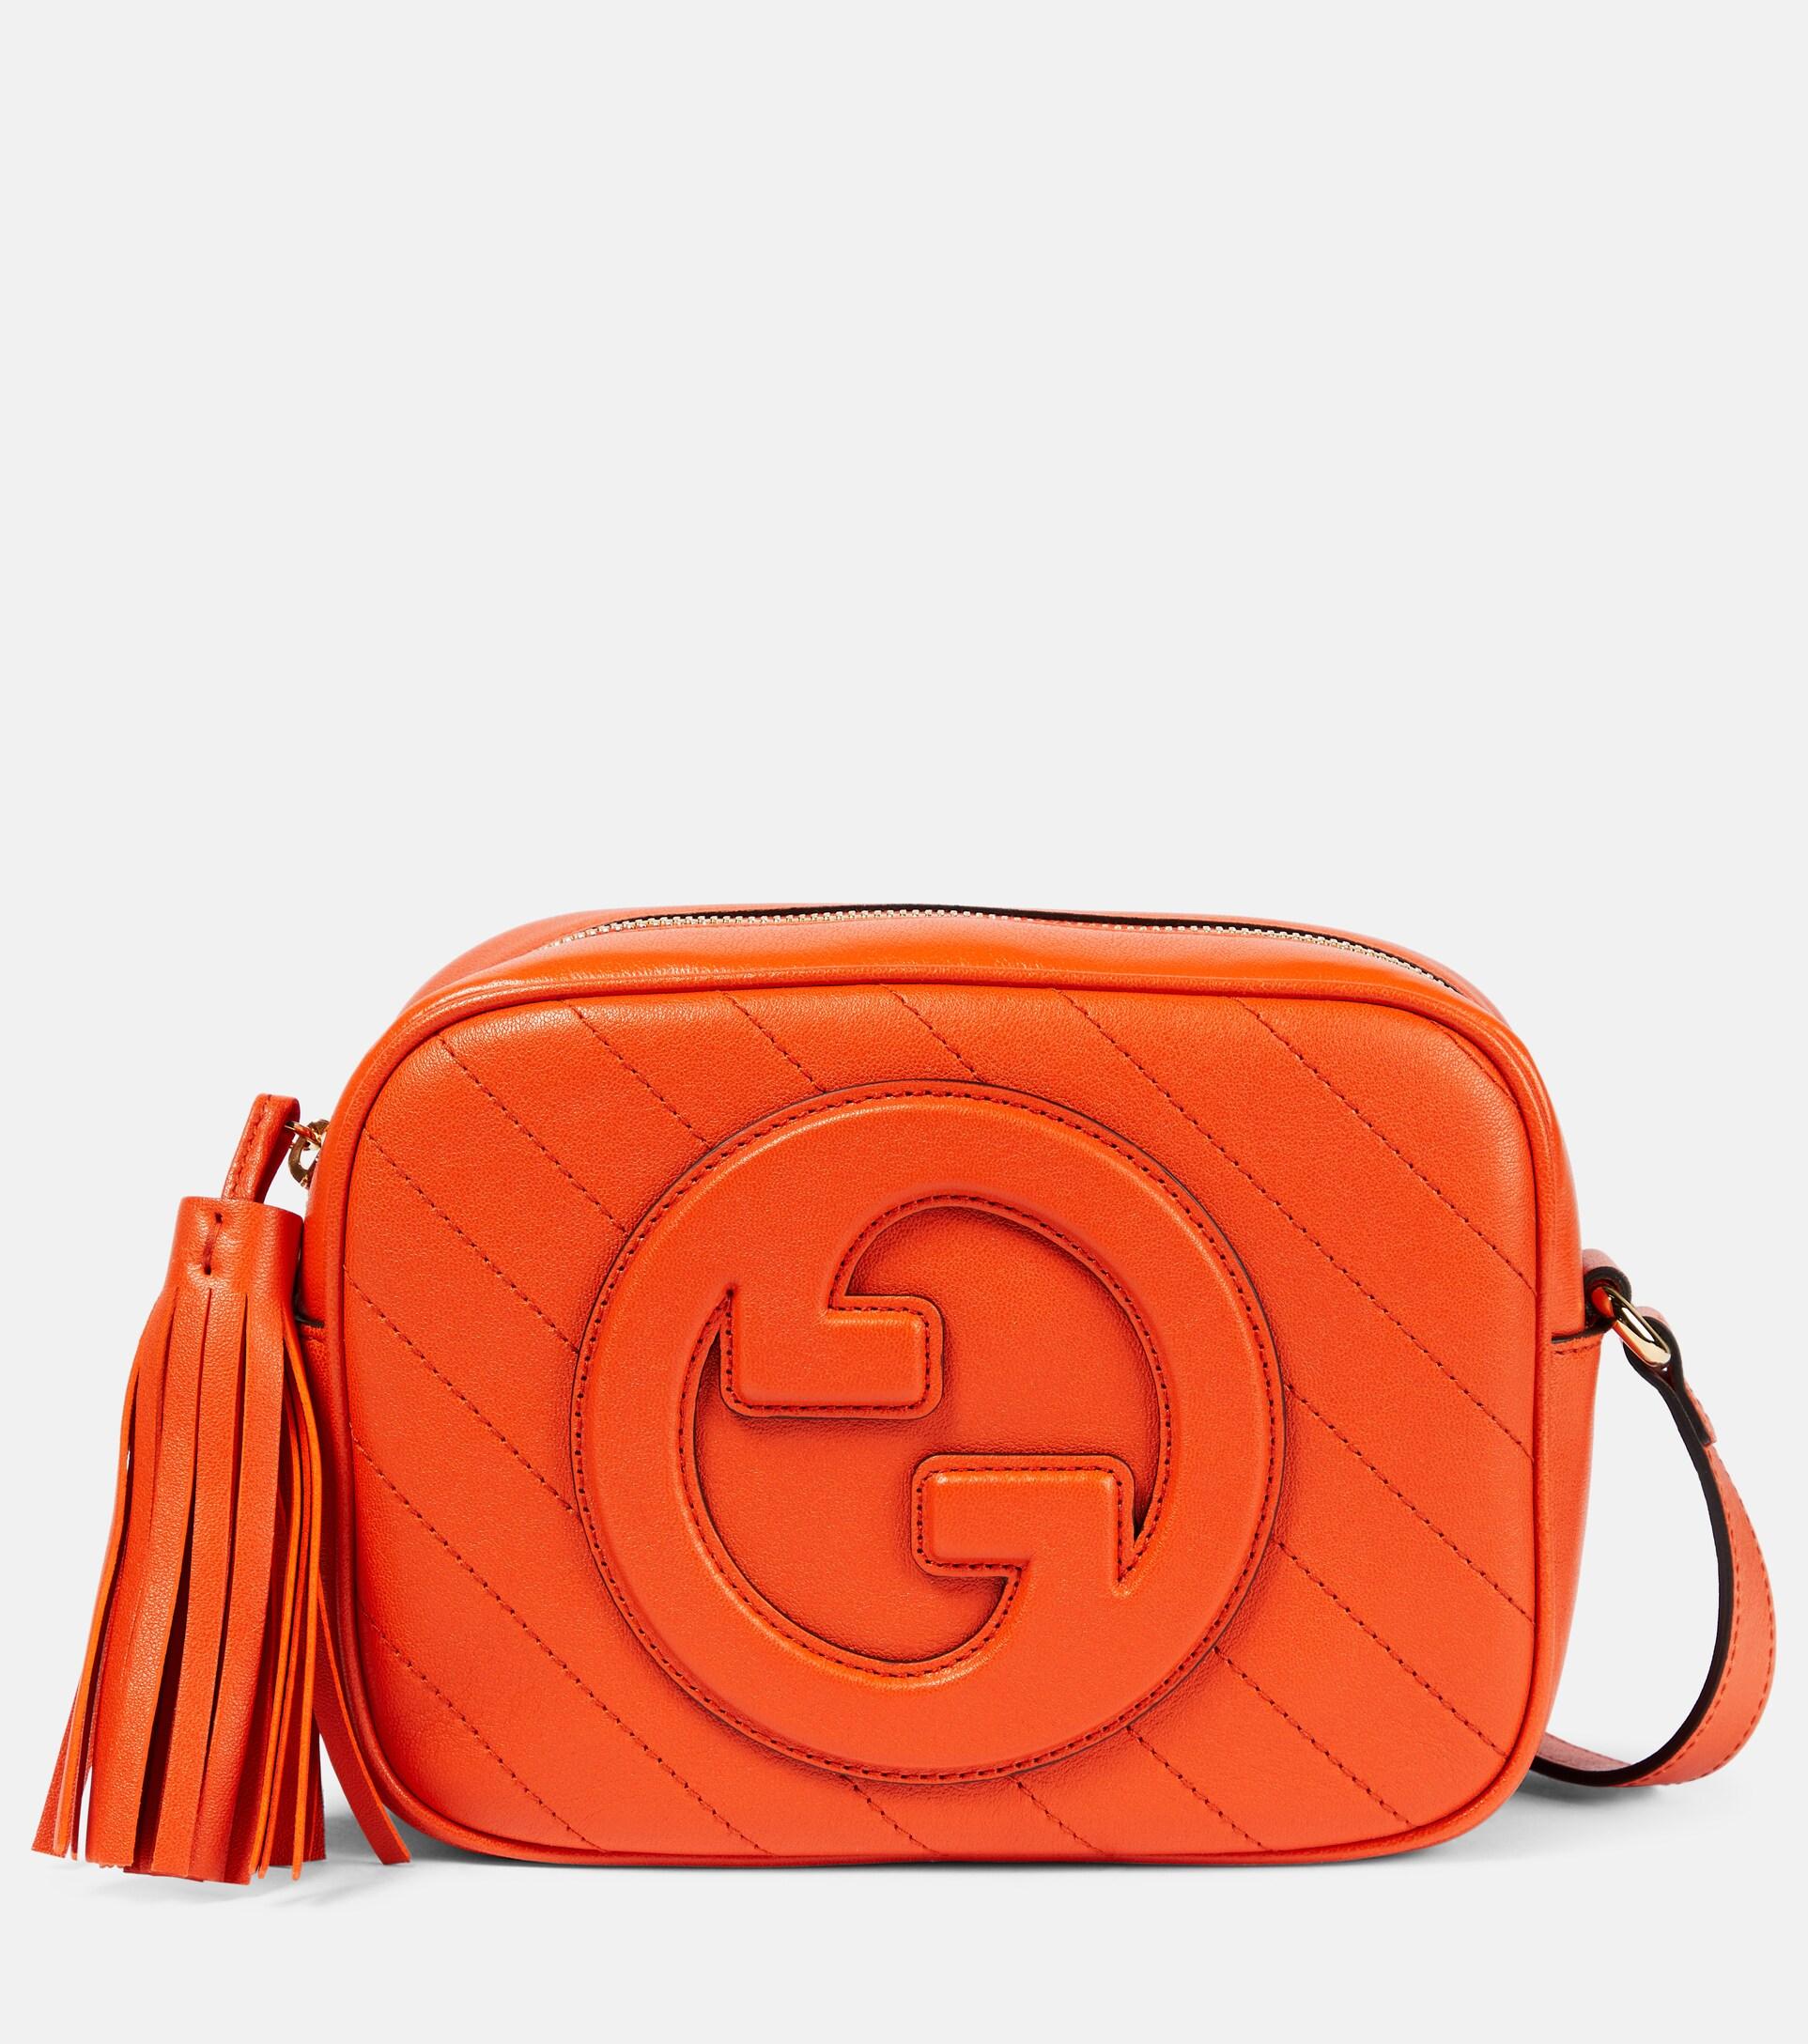 Gucci Blondie Small Leather Shoulder Bag in Orange | Lyst